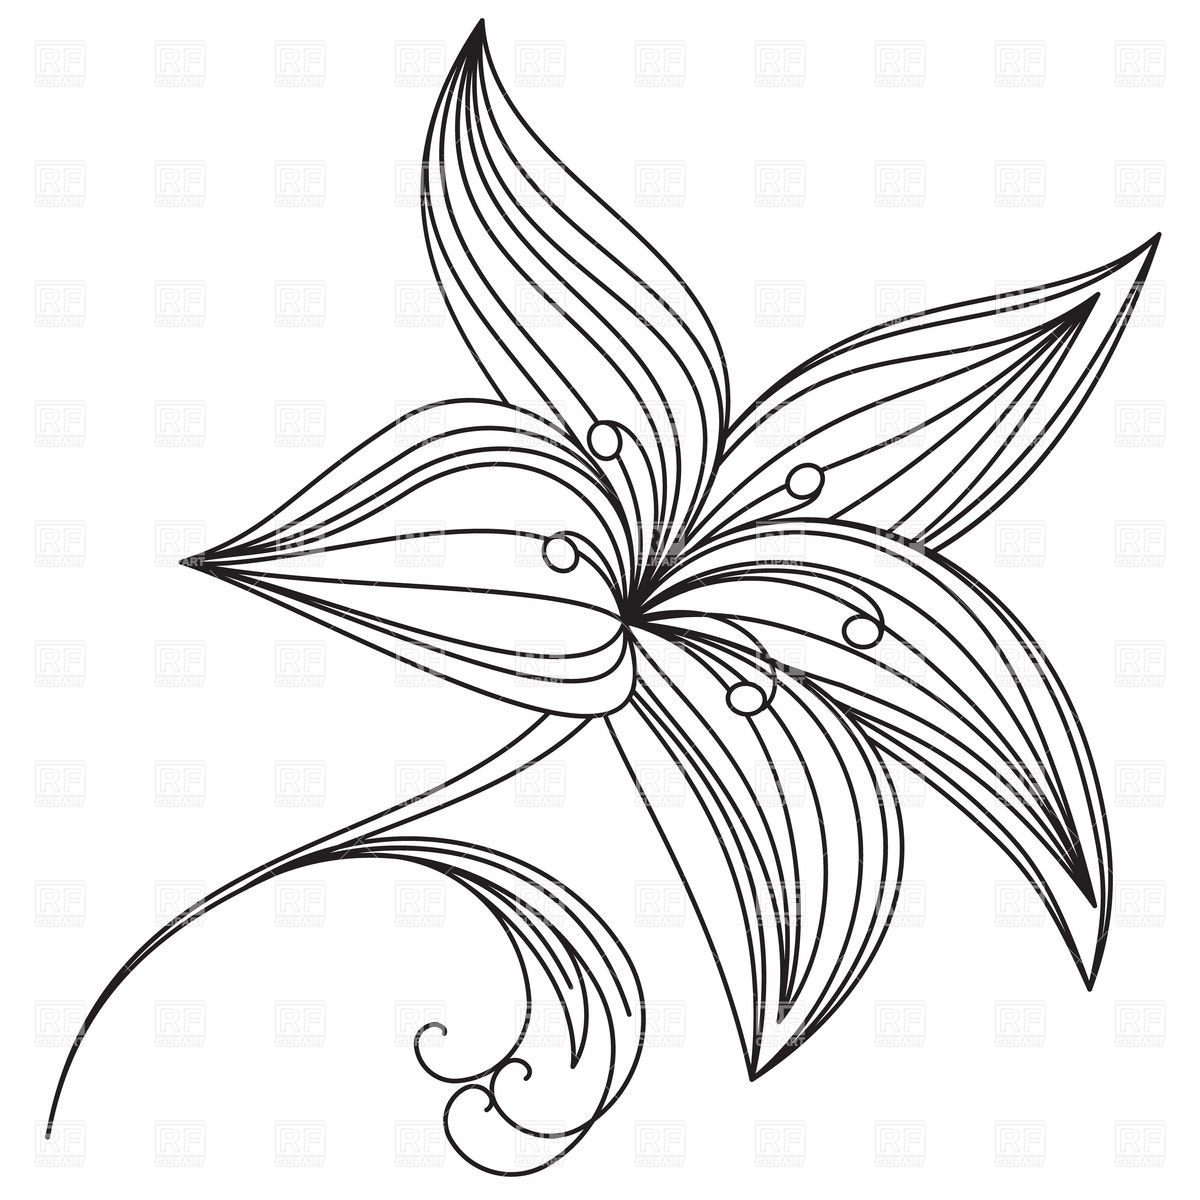 Flower Of Lily Outline Download Royalty Free Vector Clipart  Eps